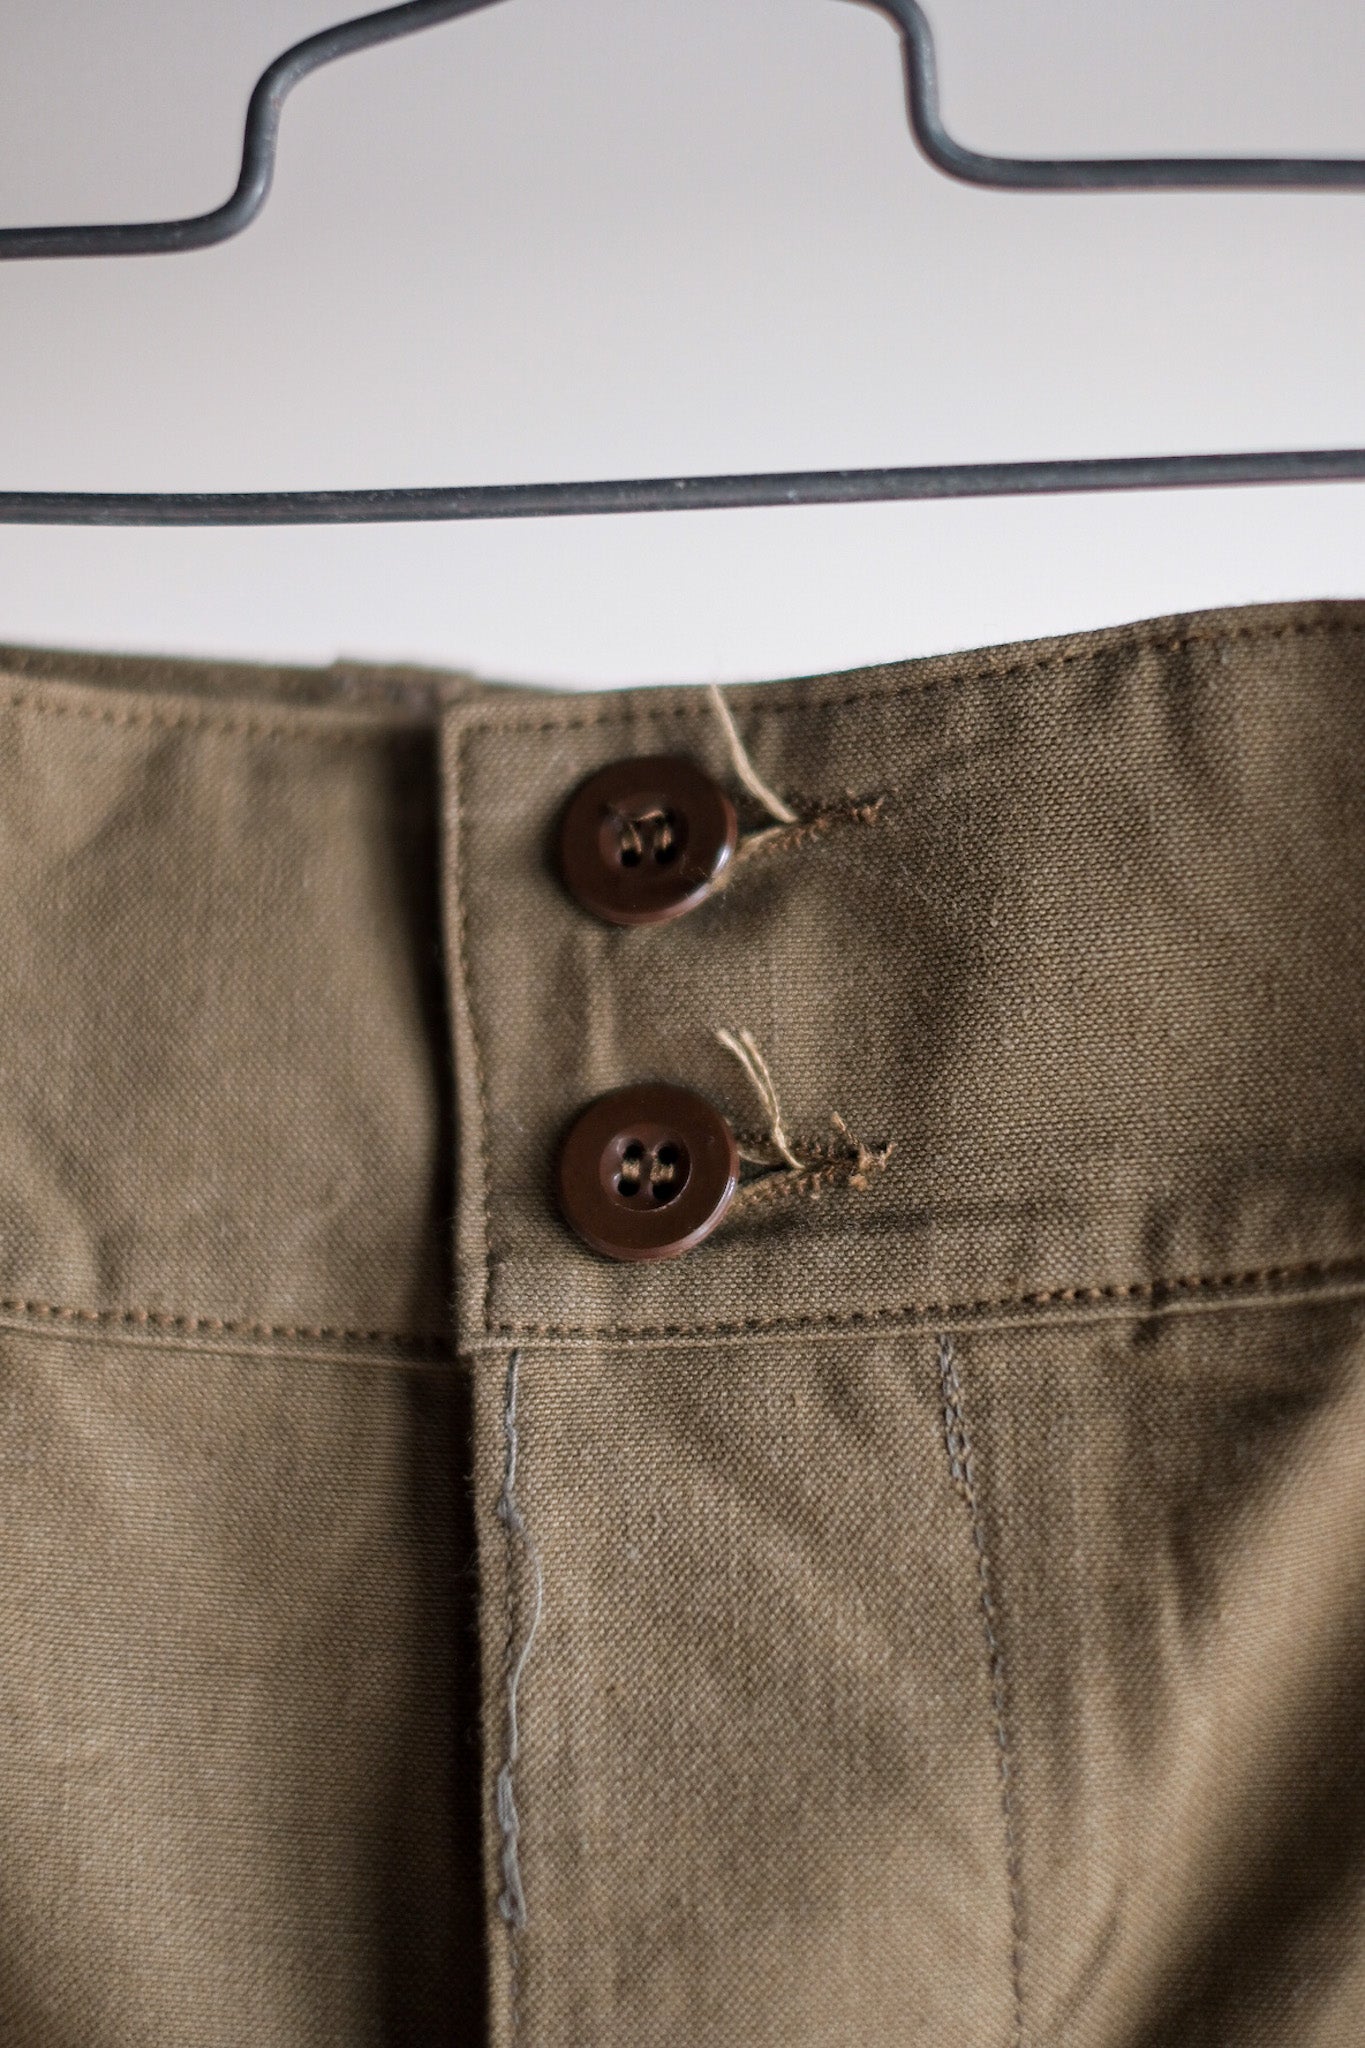 【~50's】French Army M47 Field Trousers Size.31 "Remake" "Dead Stock"